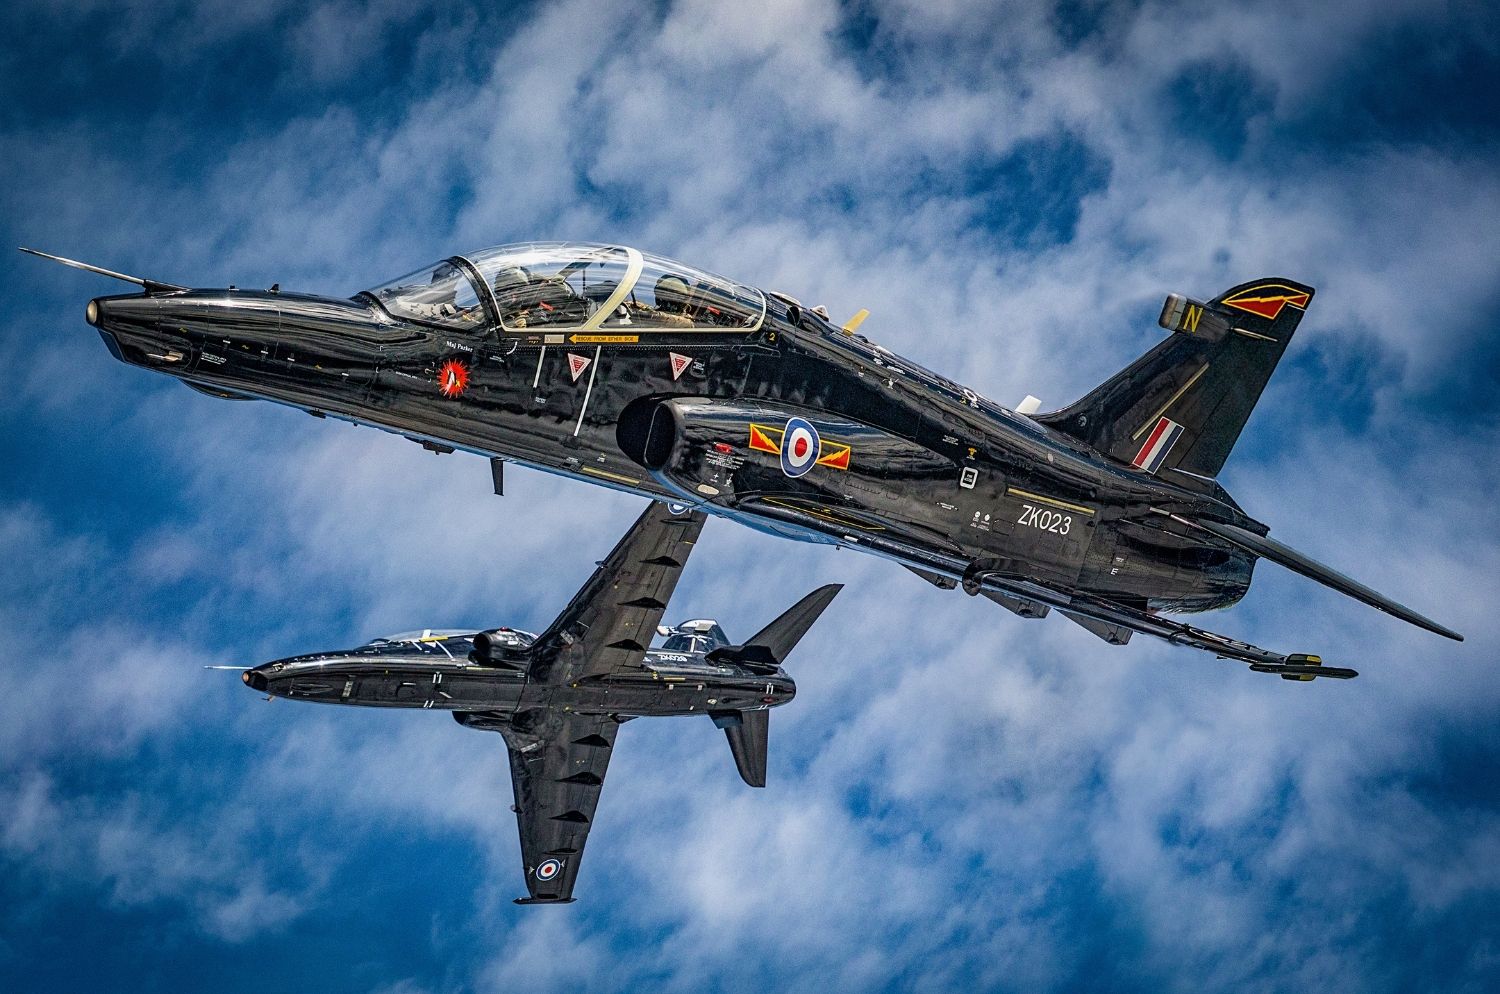 Two Hawk T2 training aircrafts which provide fast jet training for trainee pilots as part of the UK Military Flying Training System